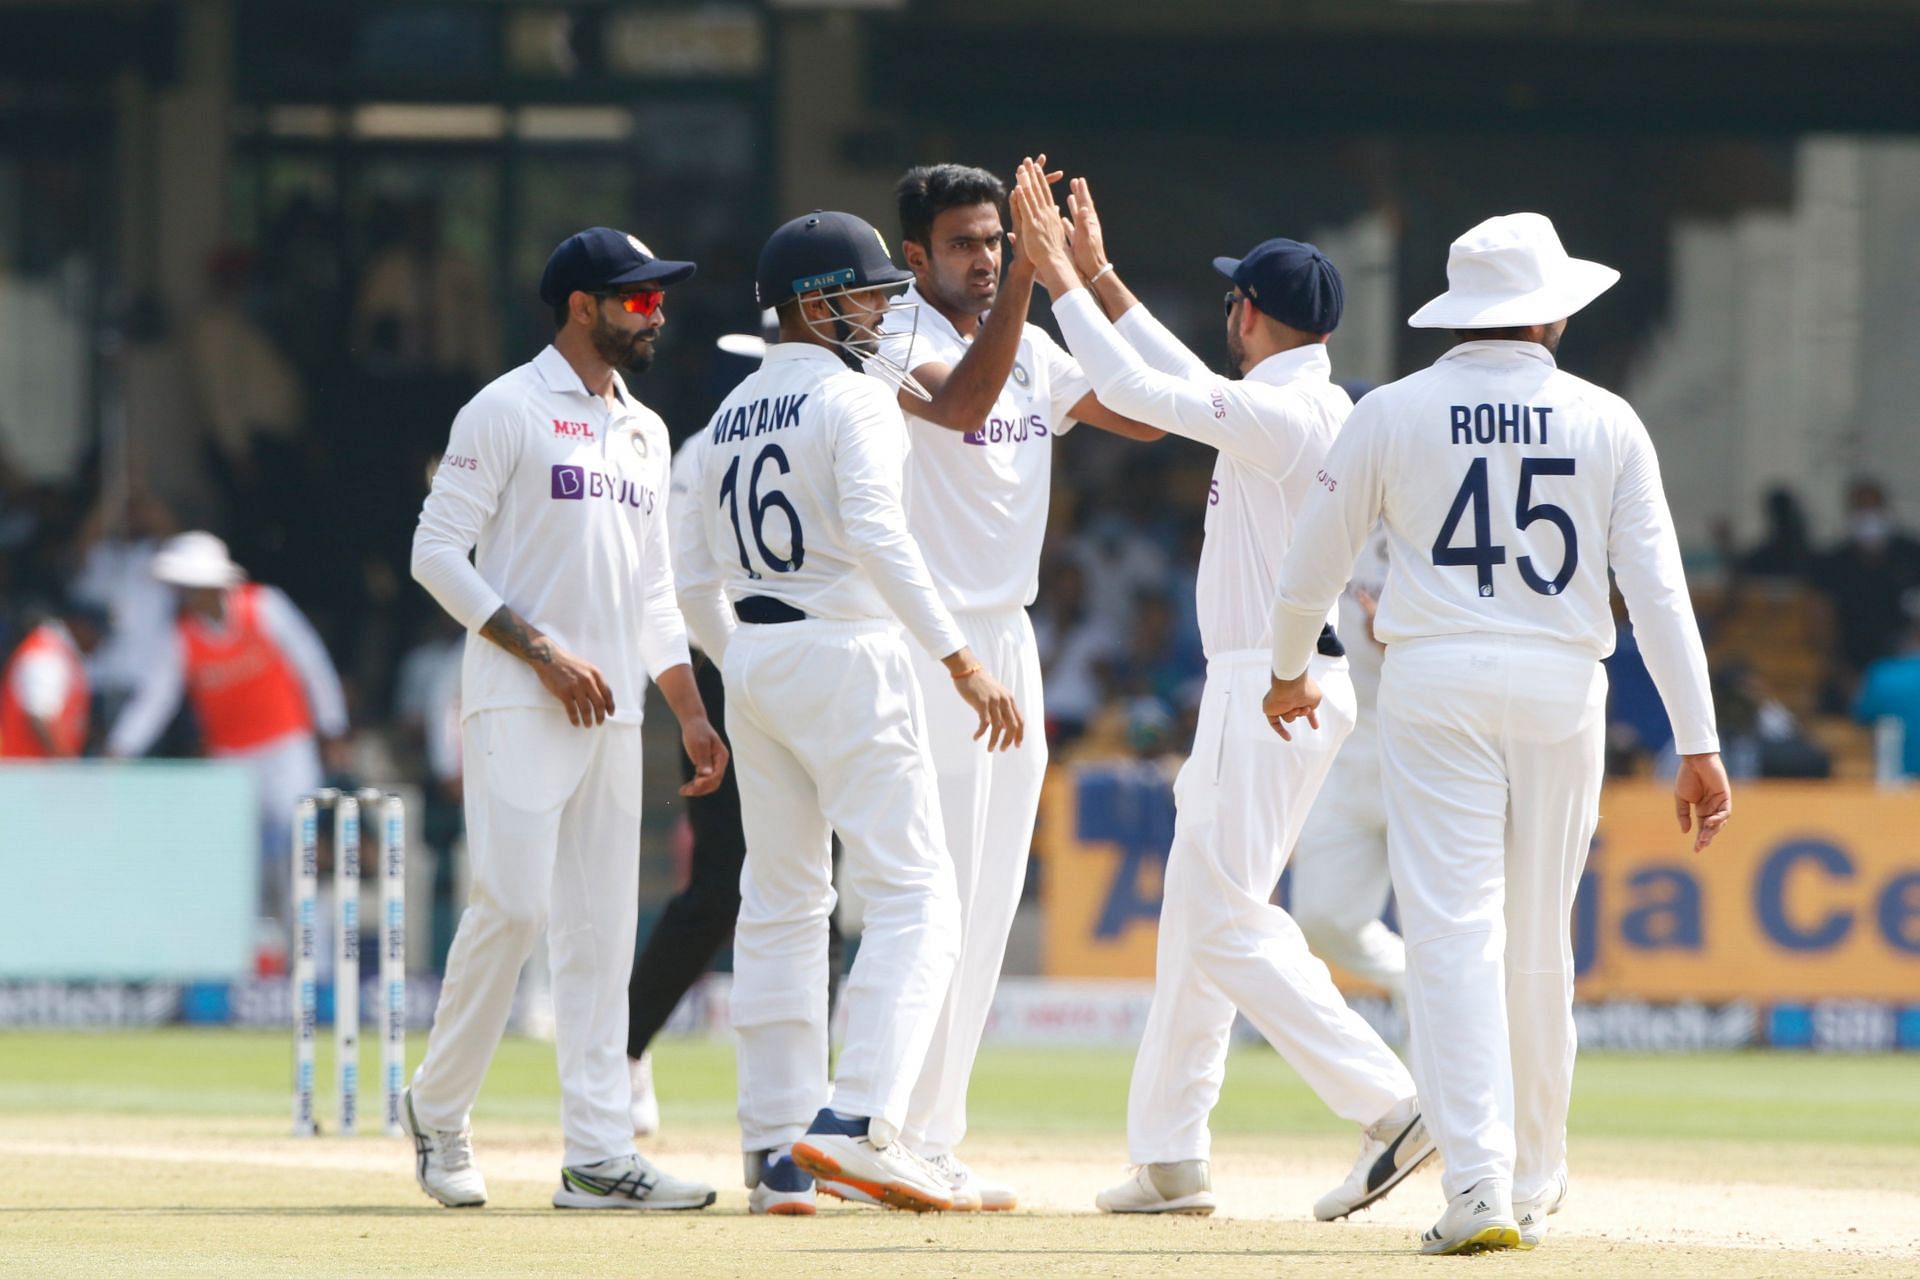 Team India annihilated Sri Lanka in the recently concluded Test series